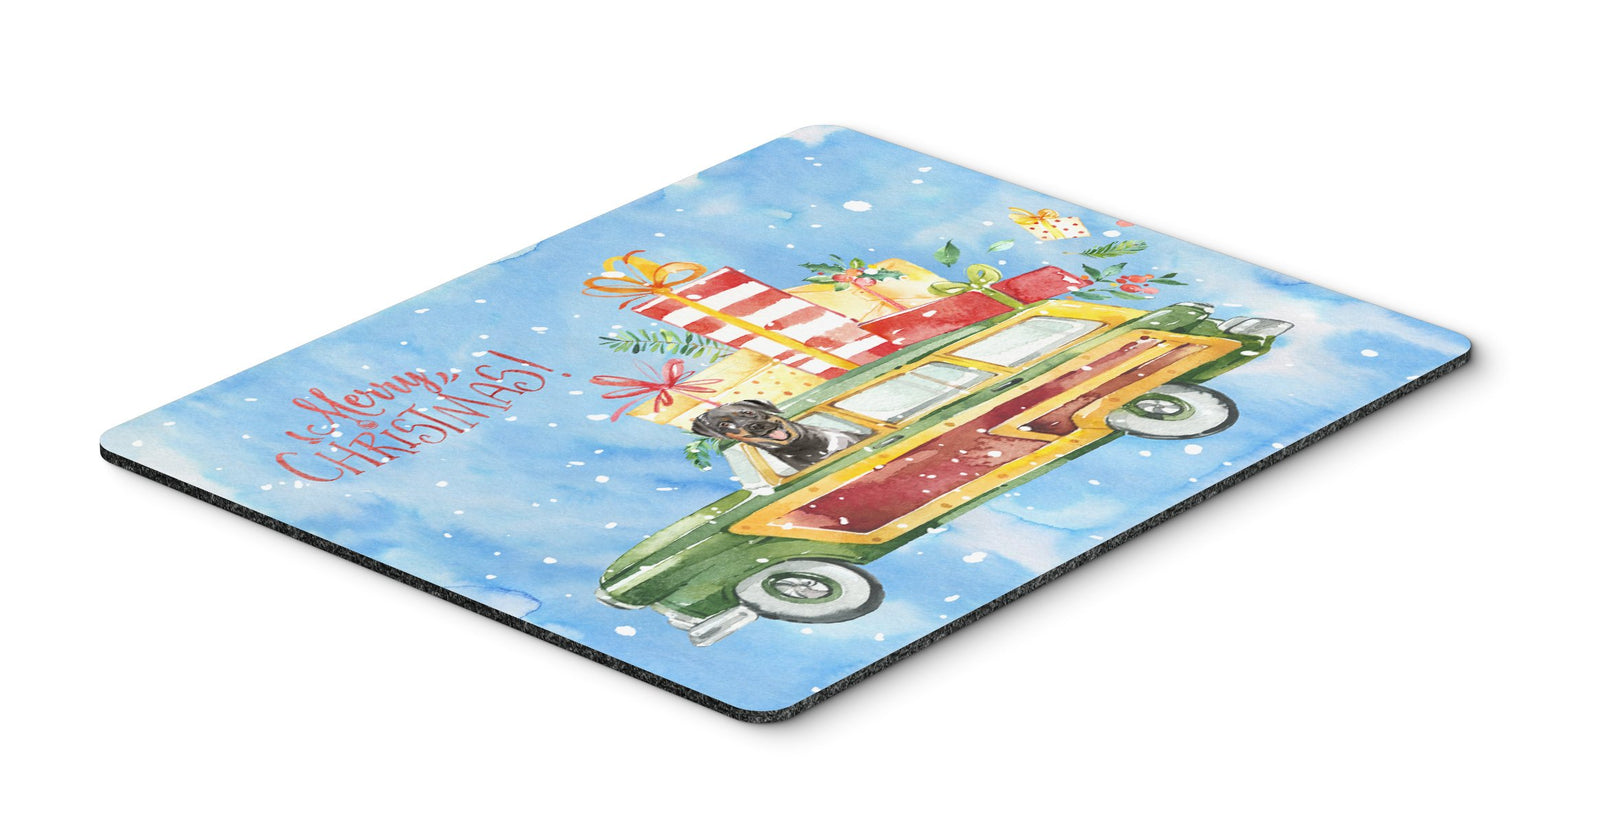 Merry Christmas Rottweiler Mouse Pad, Hot Pad or Trivet CK2417MP by Caroline's Treasures